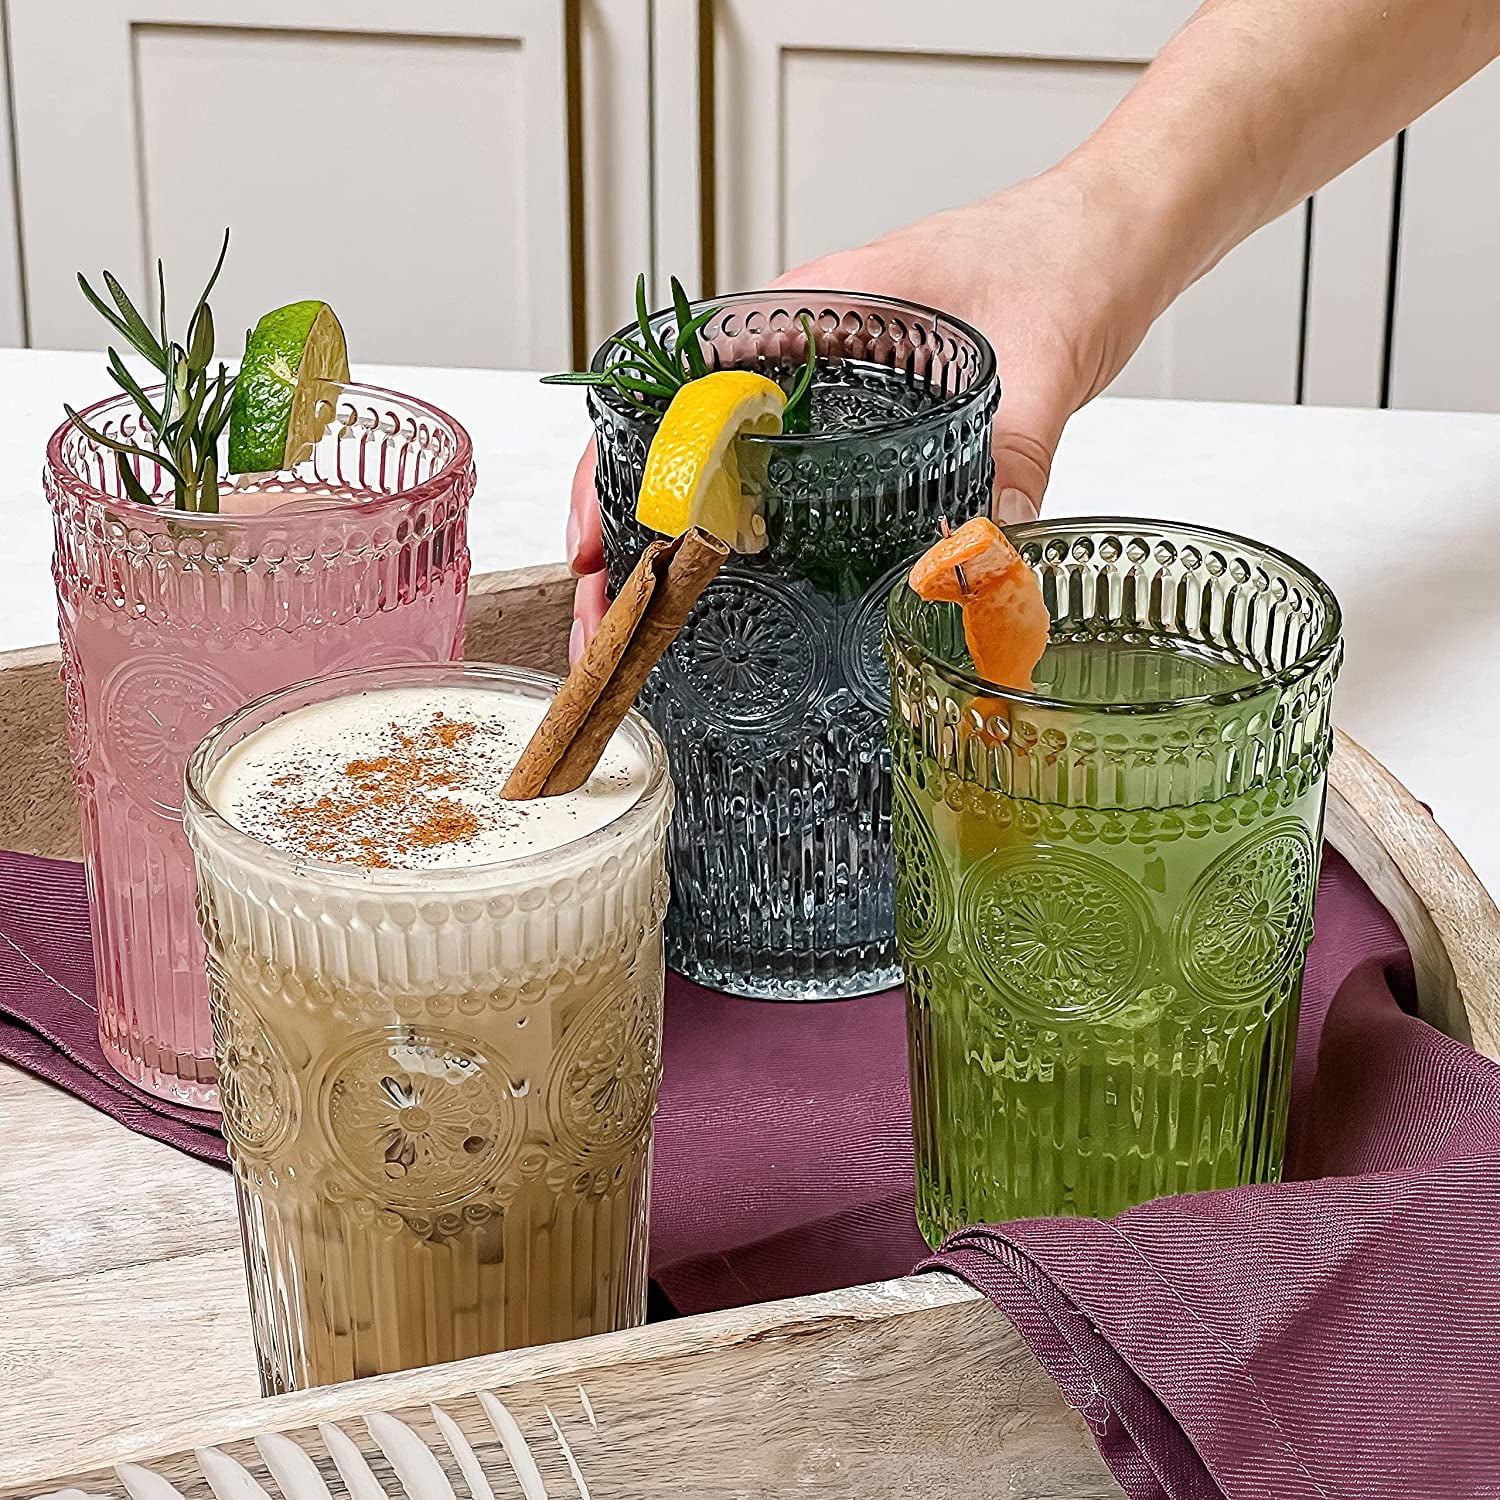 1pcs,13oz Vertical Stripe Glass Cup,Iced Coffee Cup with Lid and Straw,Ribbed Glassware,Drinking Glass,Vintage Glassware Cocktail Glasses for Cocktail